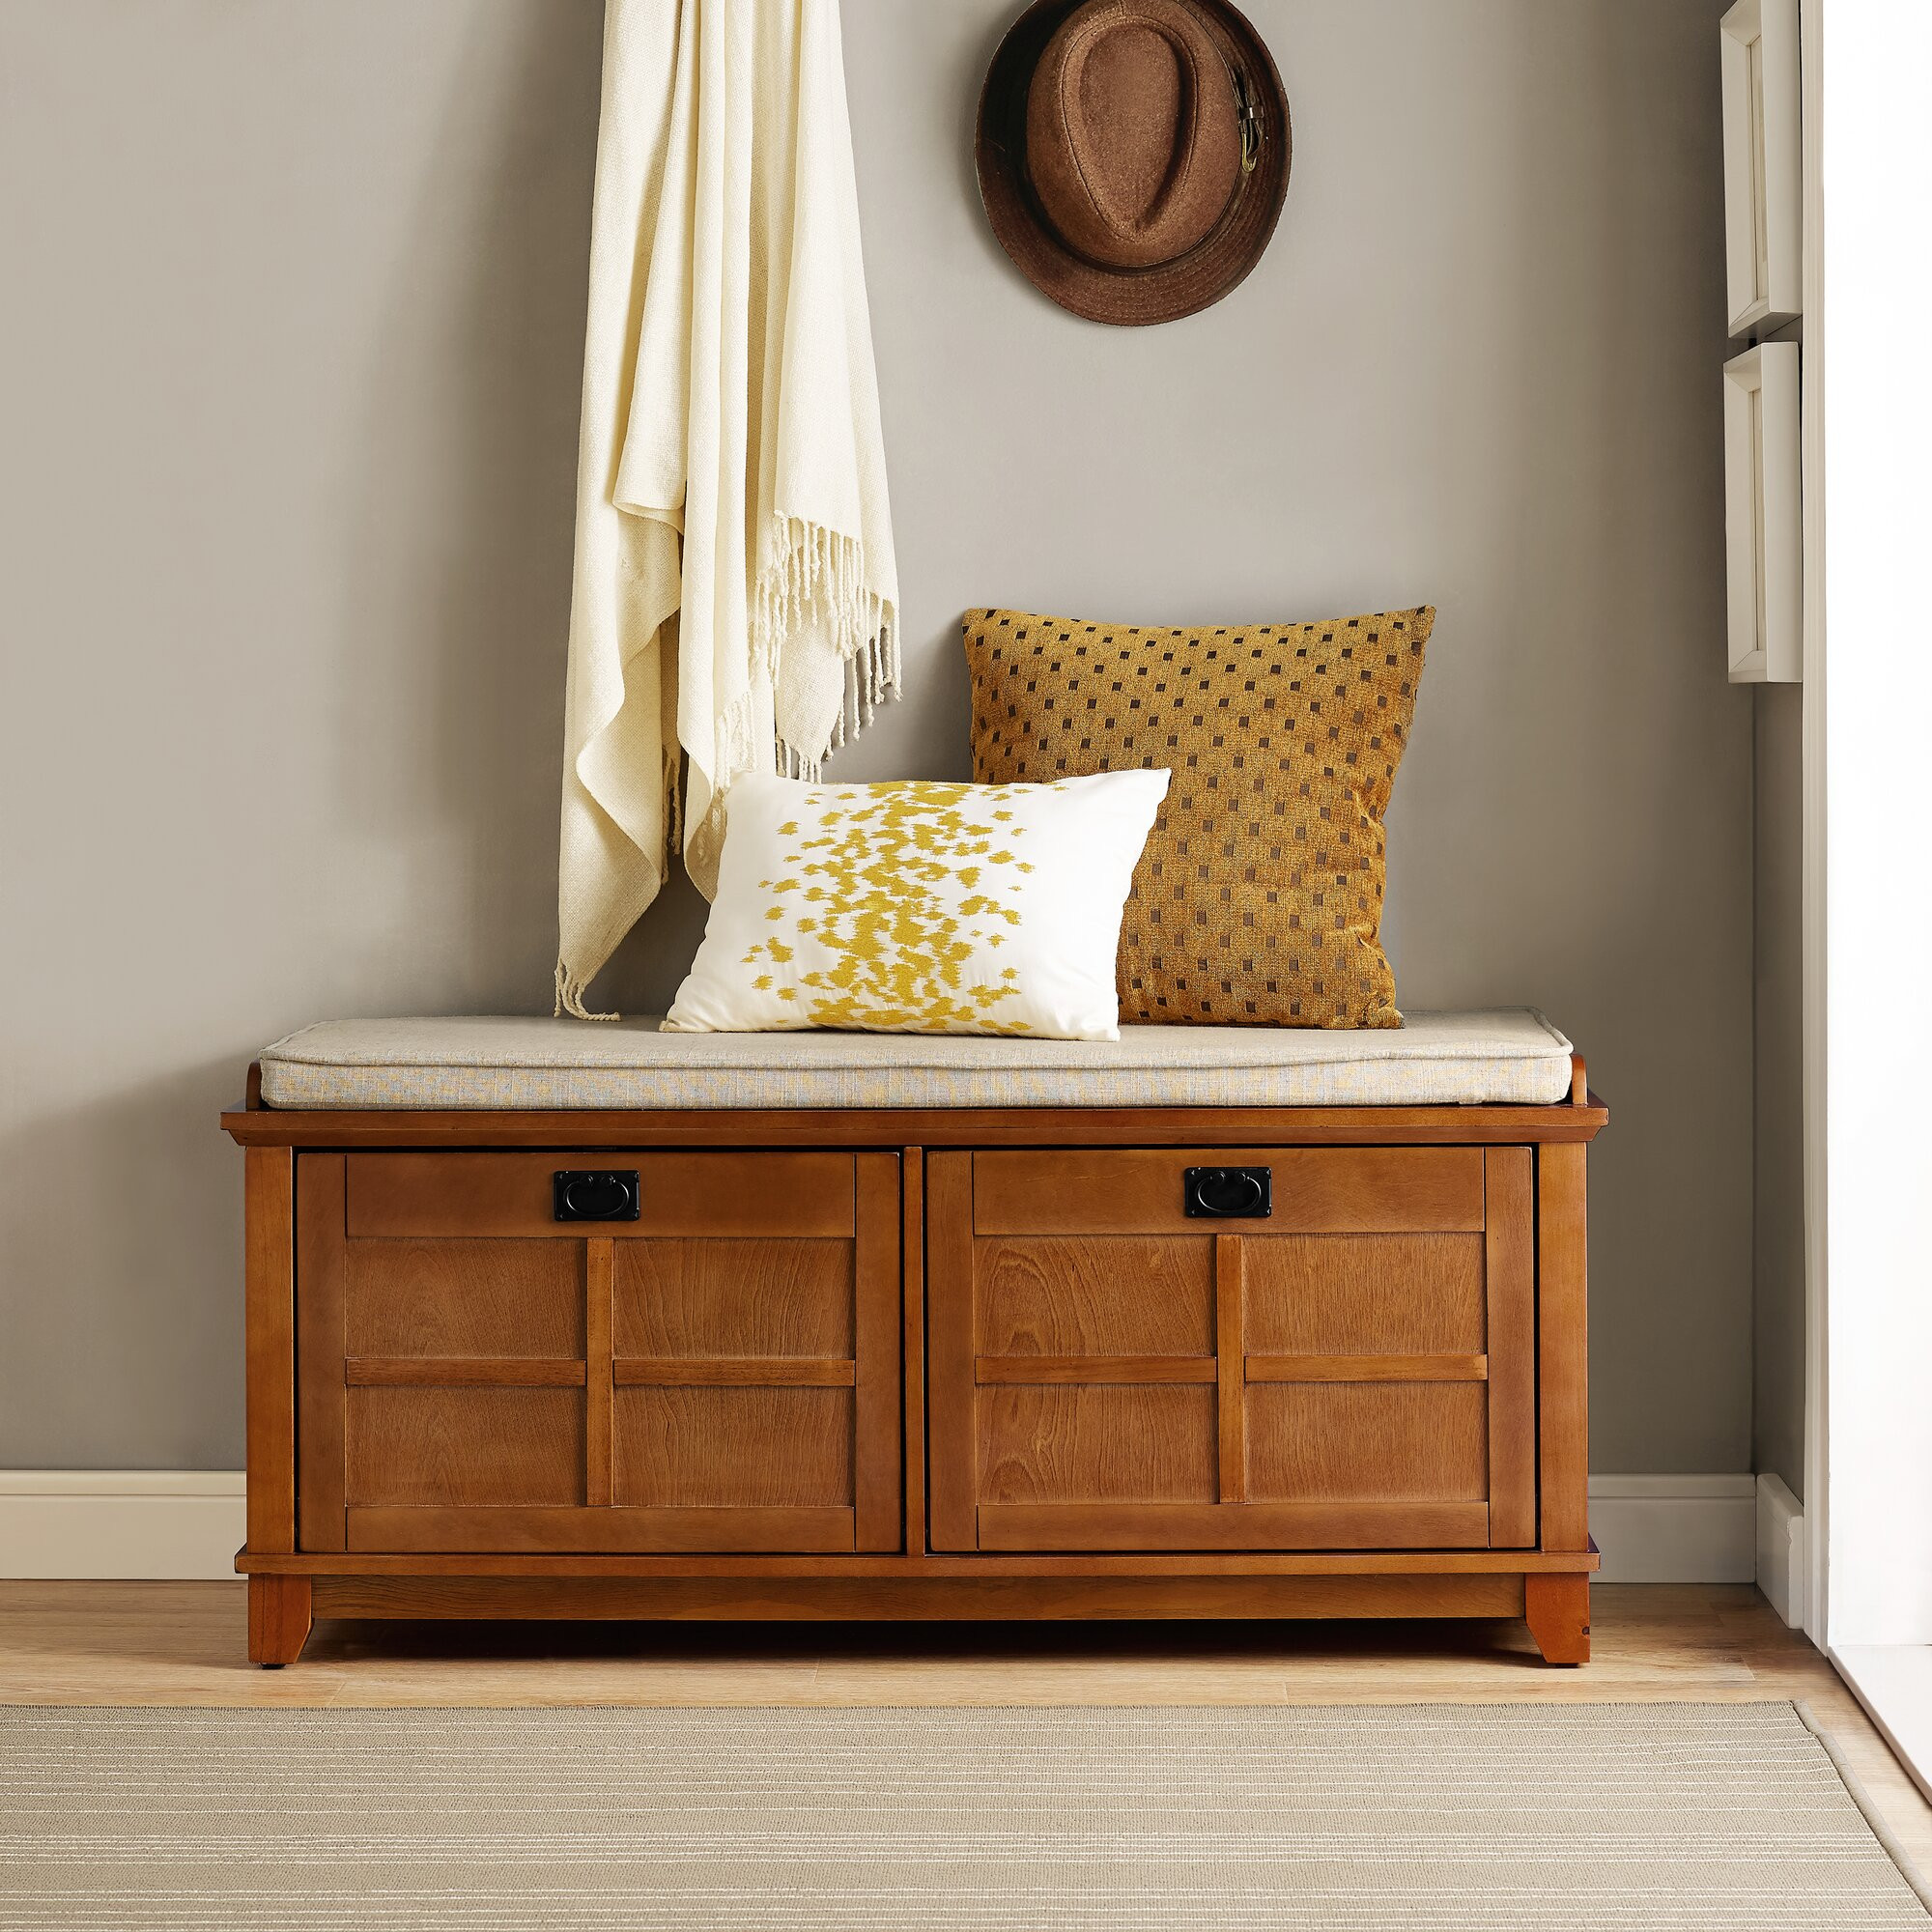 Bench For Entryway With Storage
 Haddam Fabric Storage Entryway Bench & Reviews